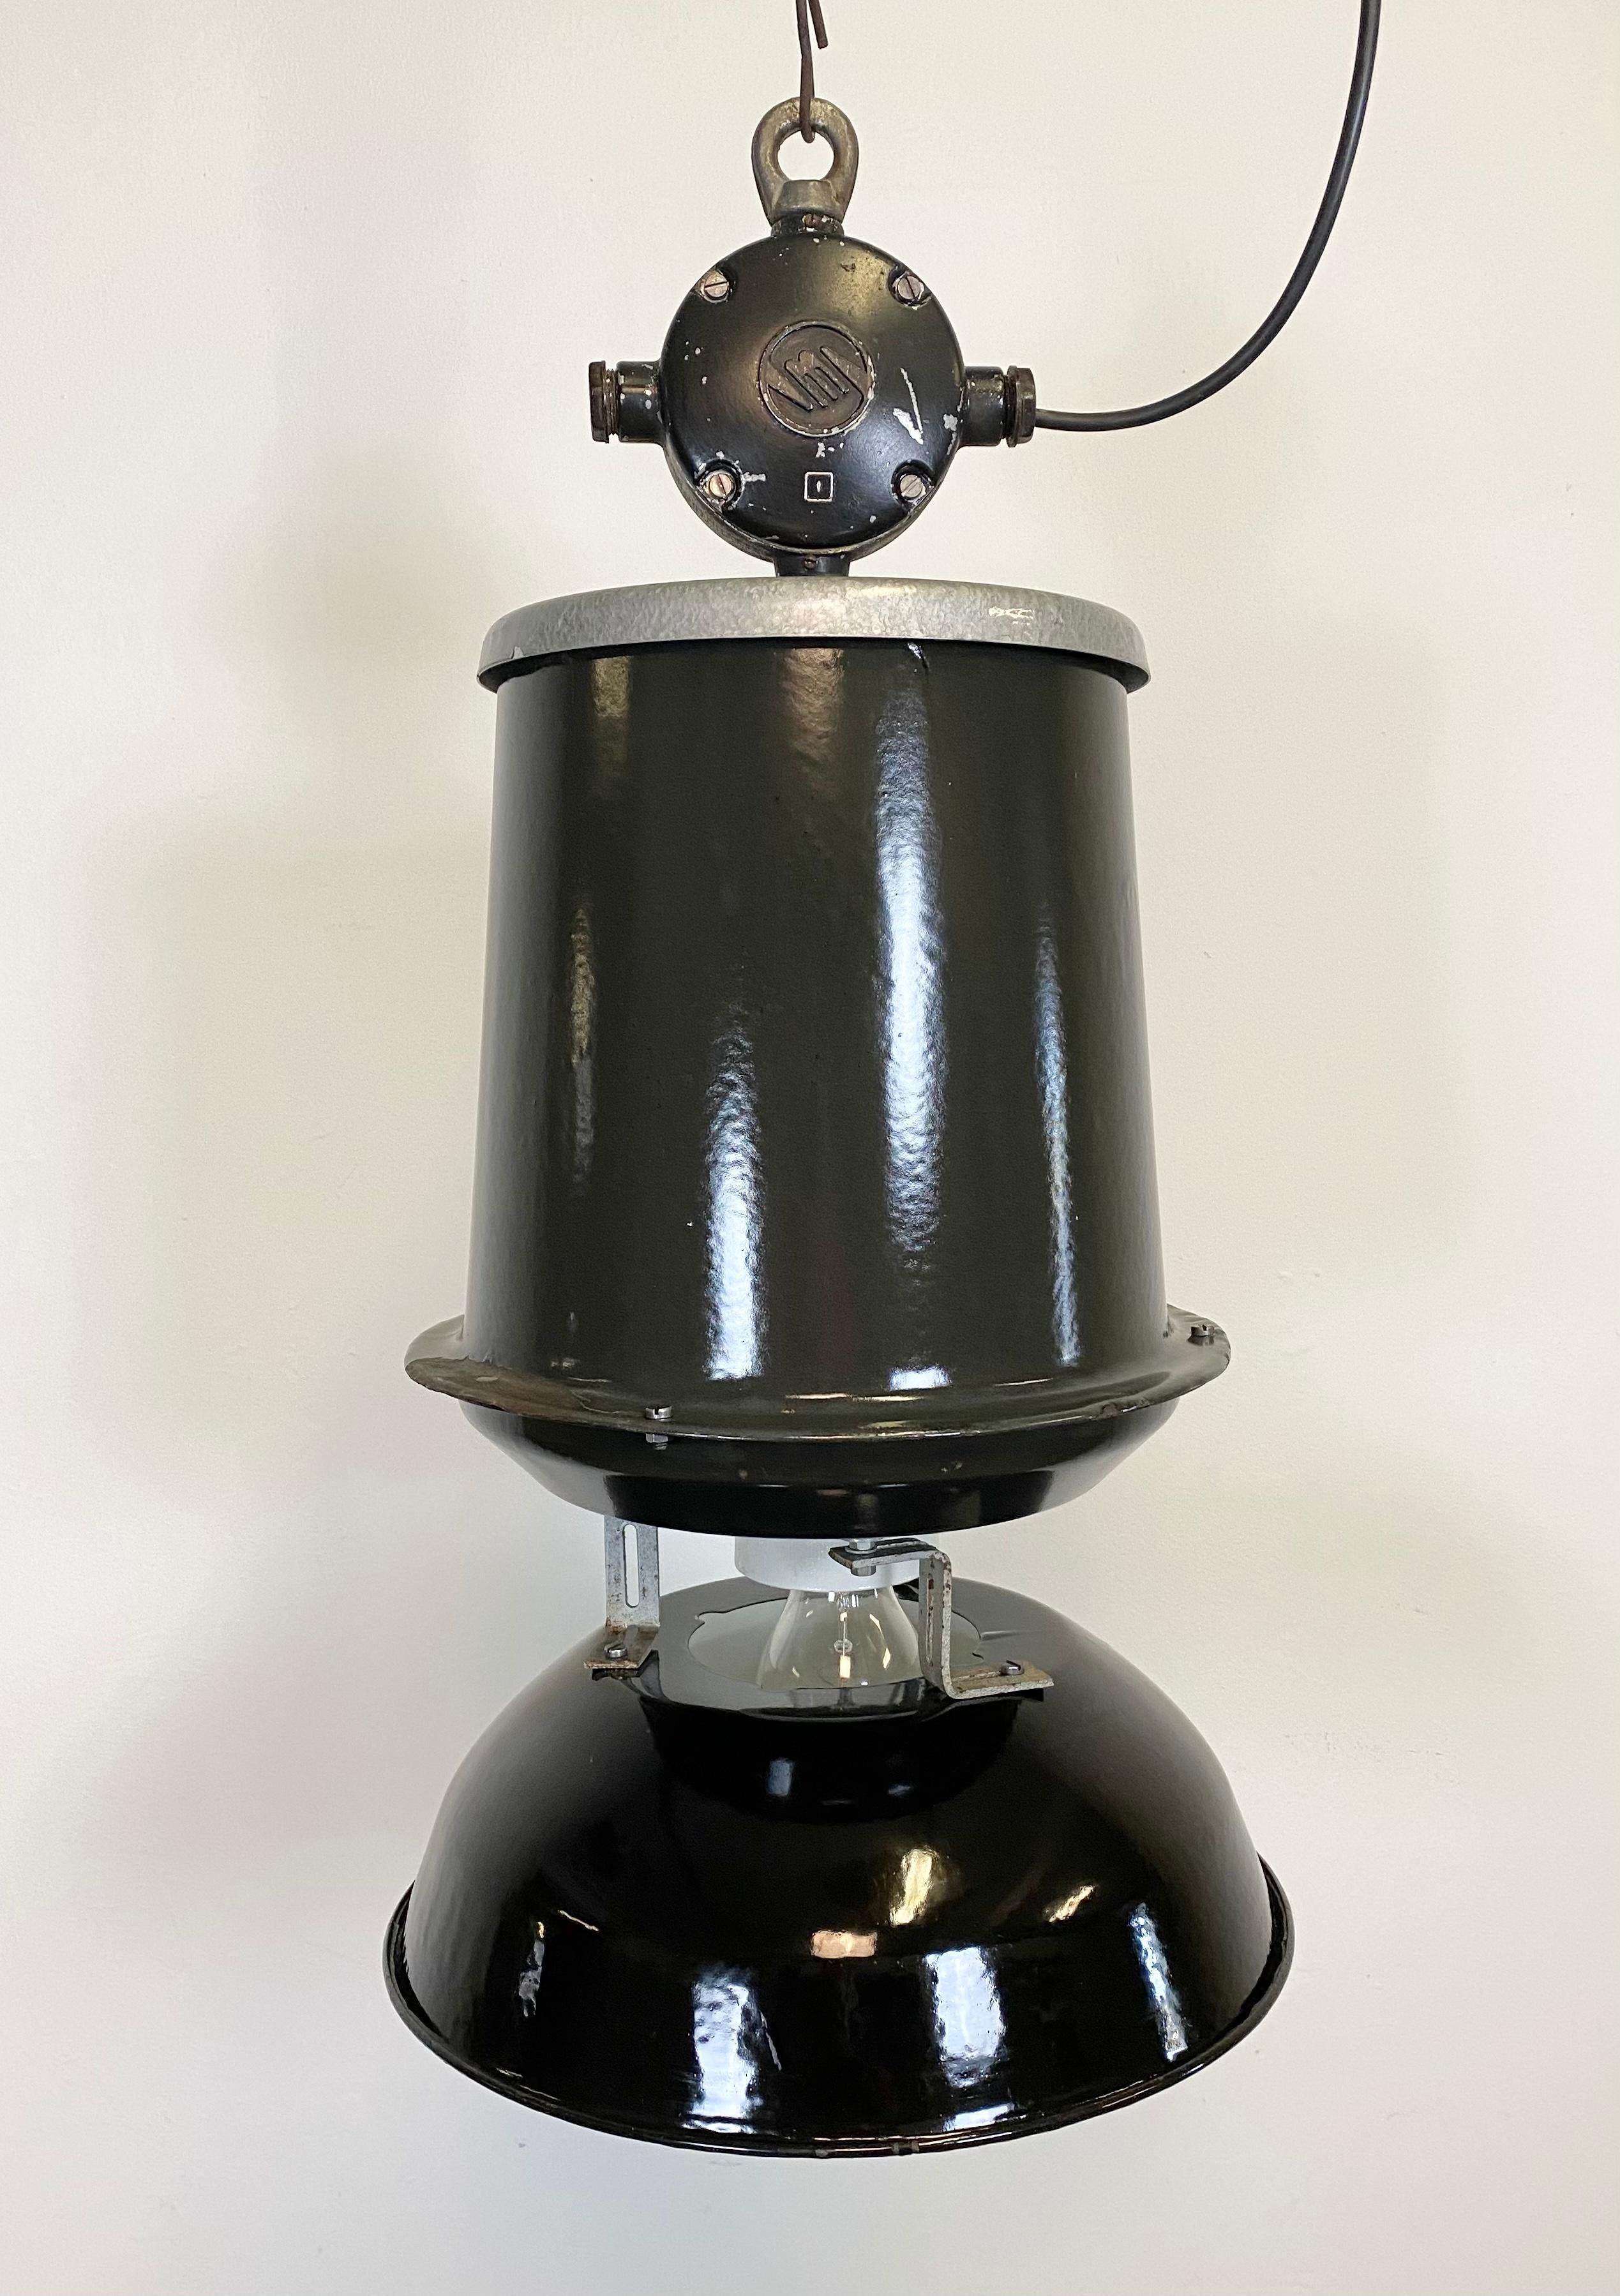 Industrial light made by Elektrosvit in former Czechoslovakia during the 1960s.It features a cast aluminium top, a black enamel body with white interior. The socket requires E 27 lightbulbs. New wiring. The weight of the lamp is 6,5 kg.